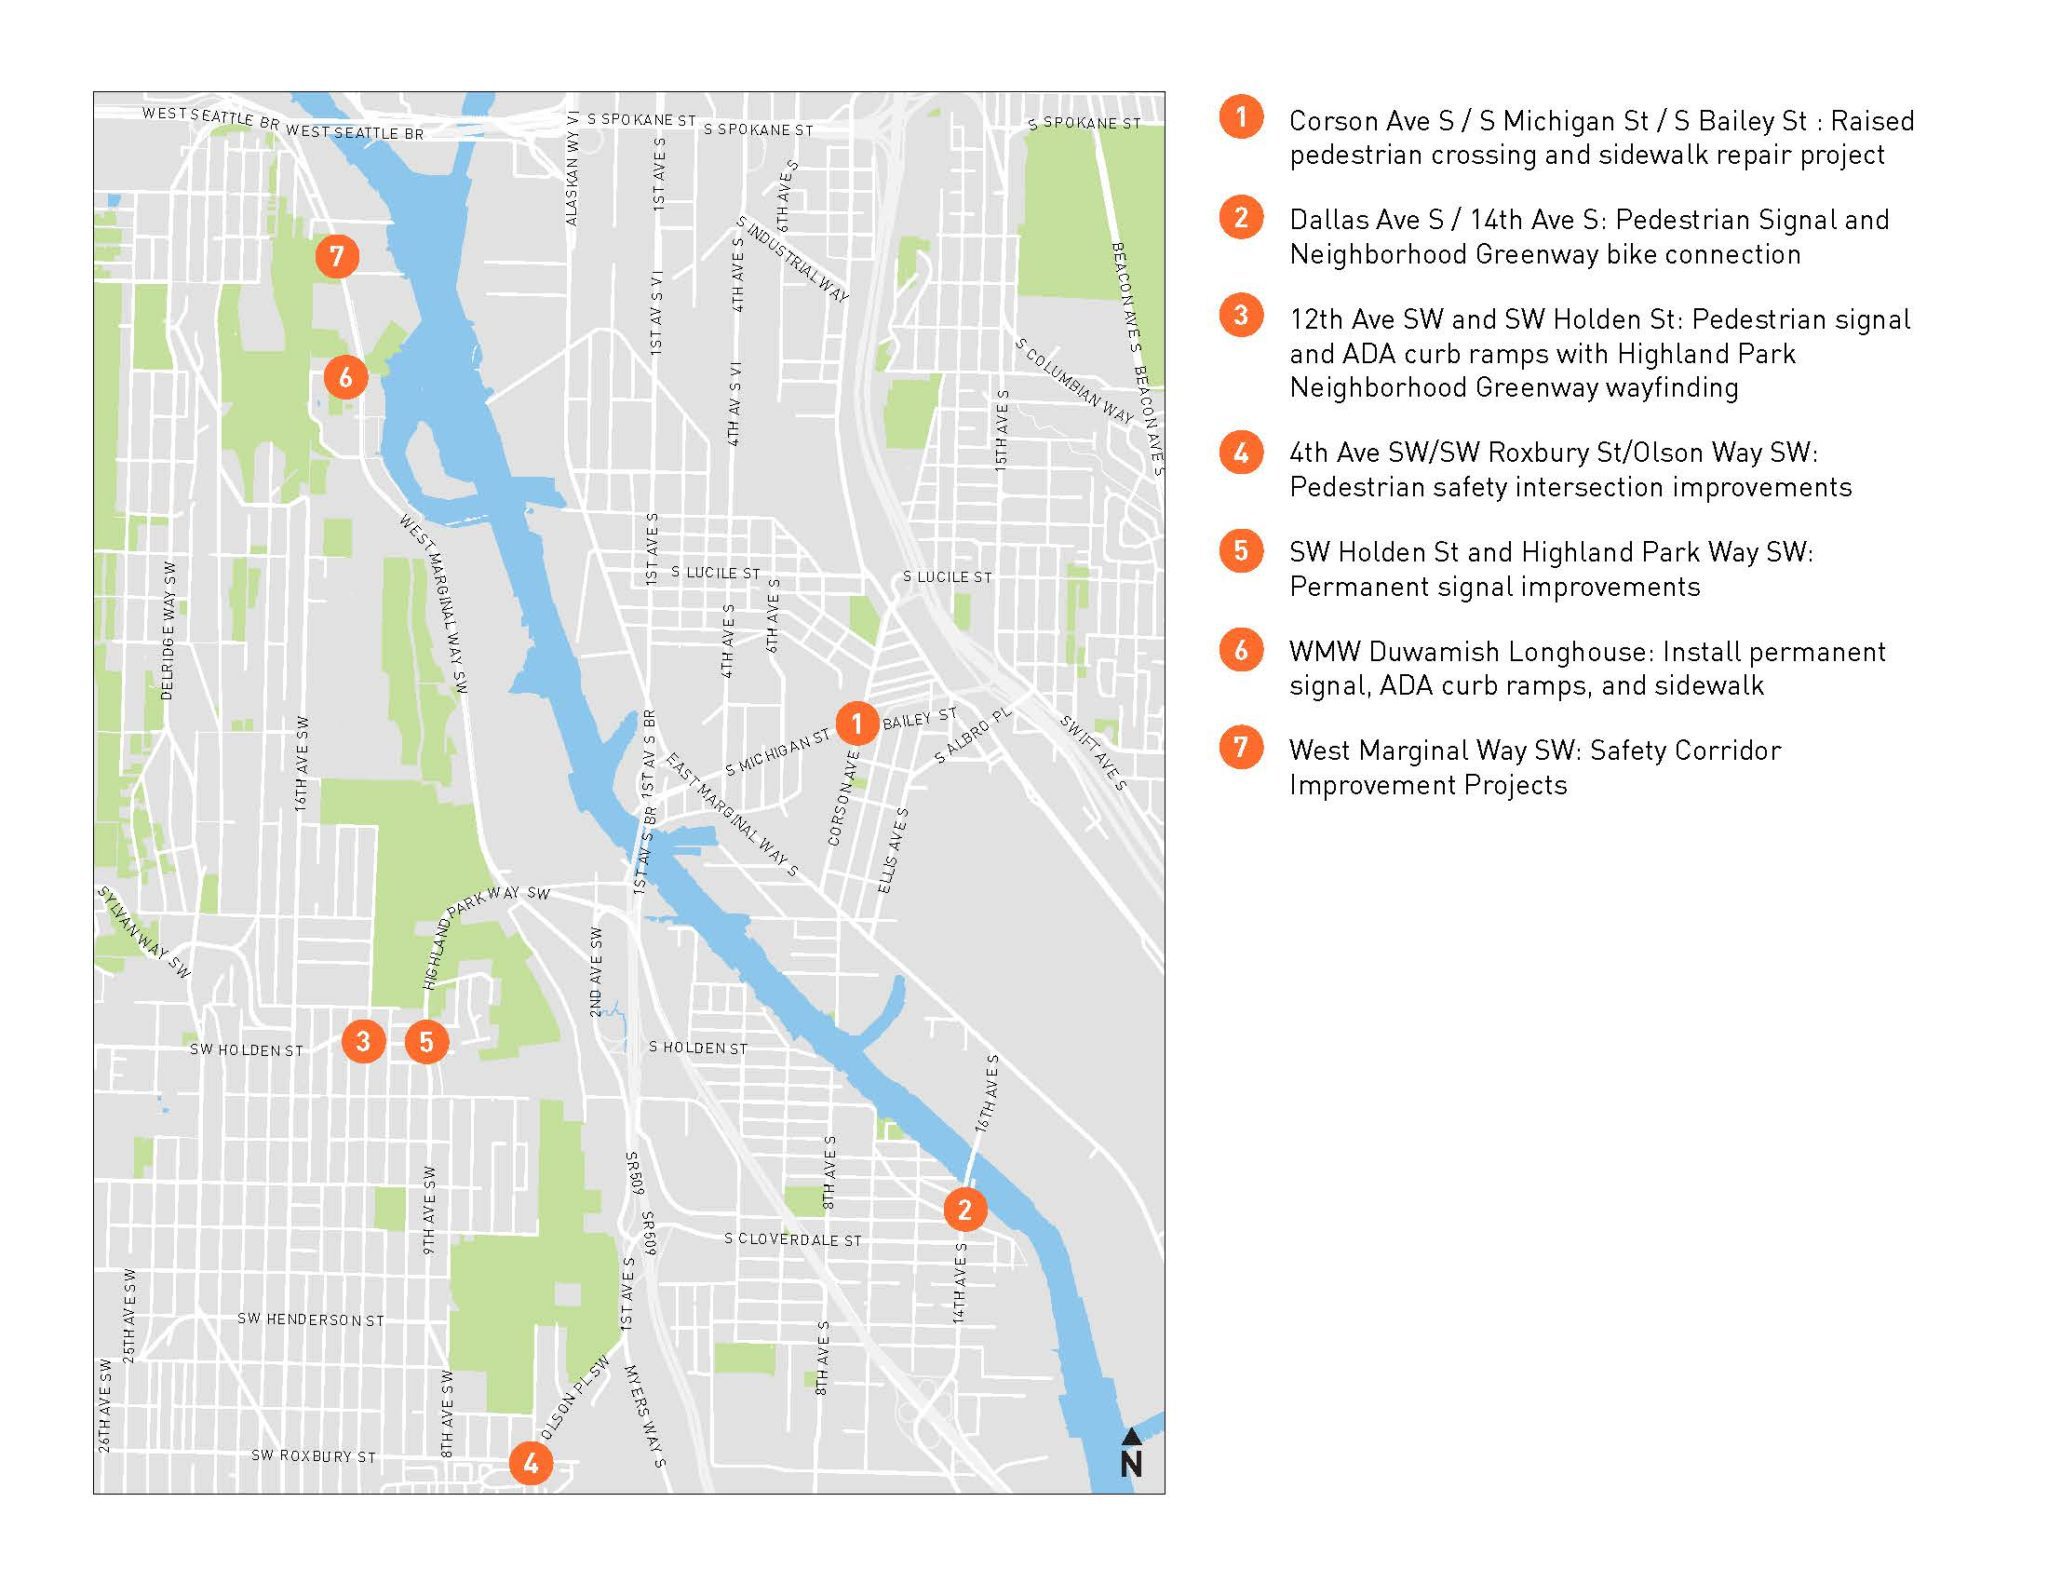 Map showing the location of seven remaining Reconnect West Seattle projects. The projects are shown with an orange labeled dot, at locations around West Seattle and the Duwamish Valley.